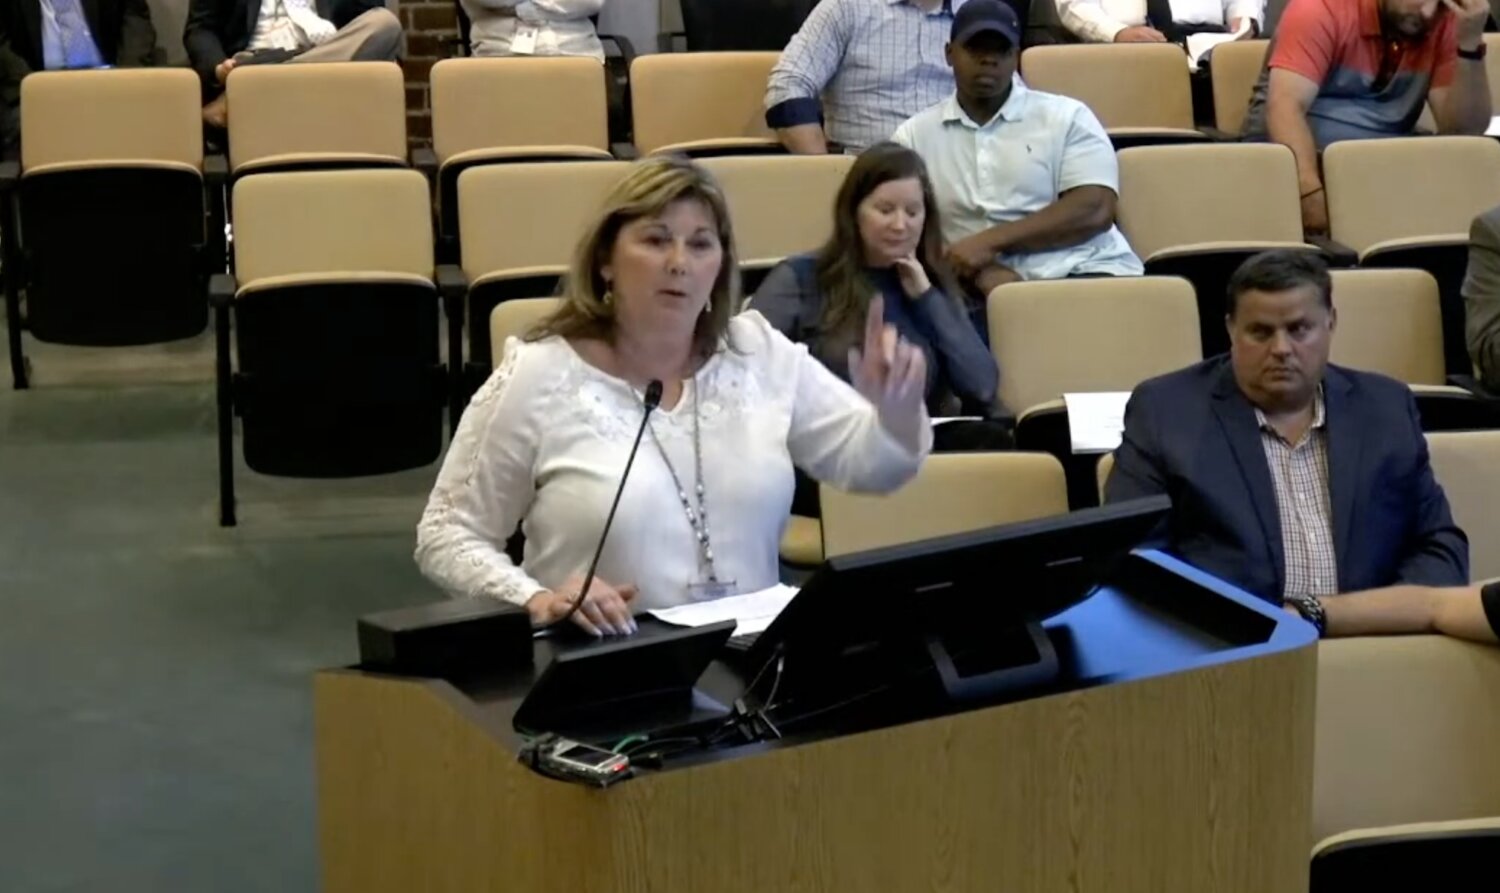 Apopka Transportation Coordinator Pam Richmond pushes back on the Oaks at Monroe's request to waive a left turn lane at its development.